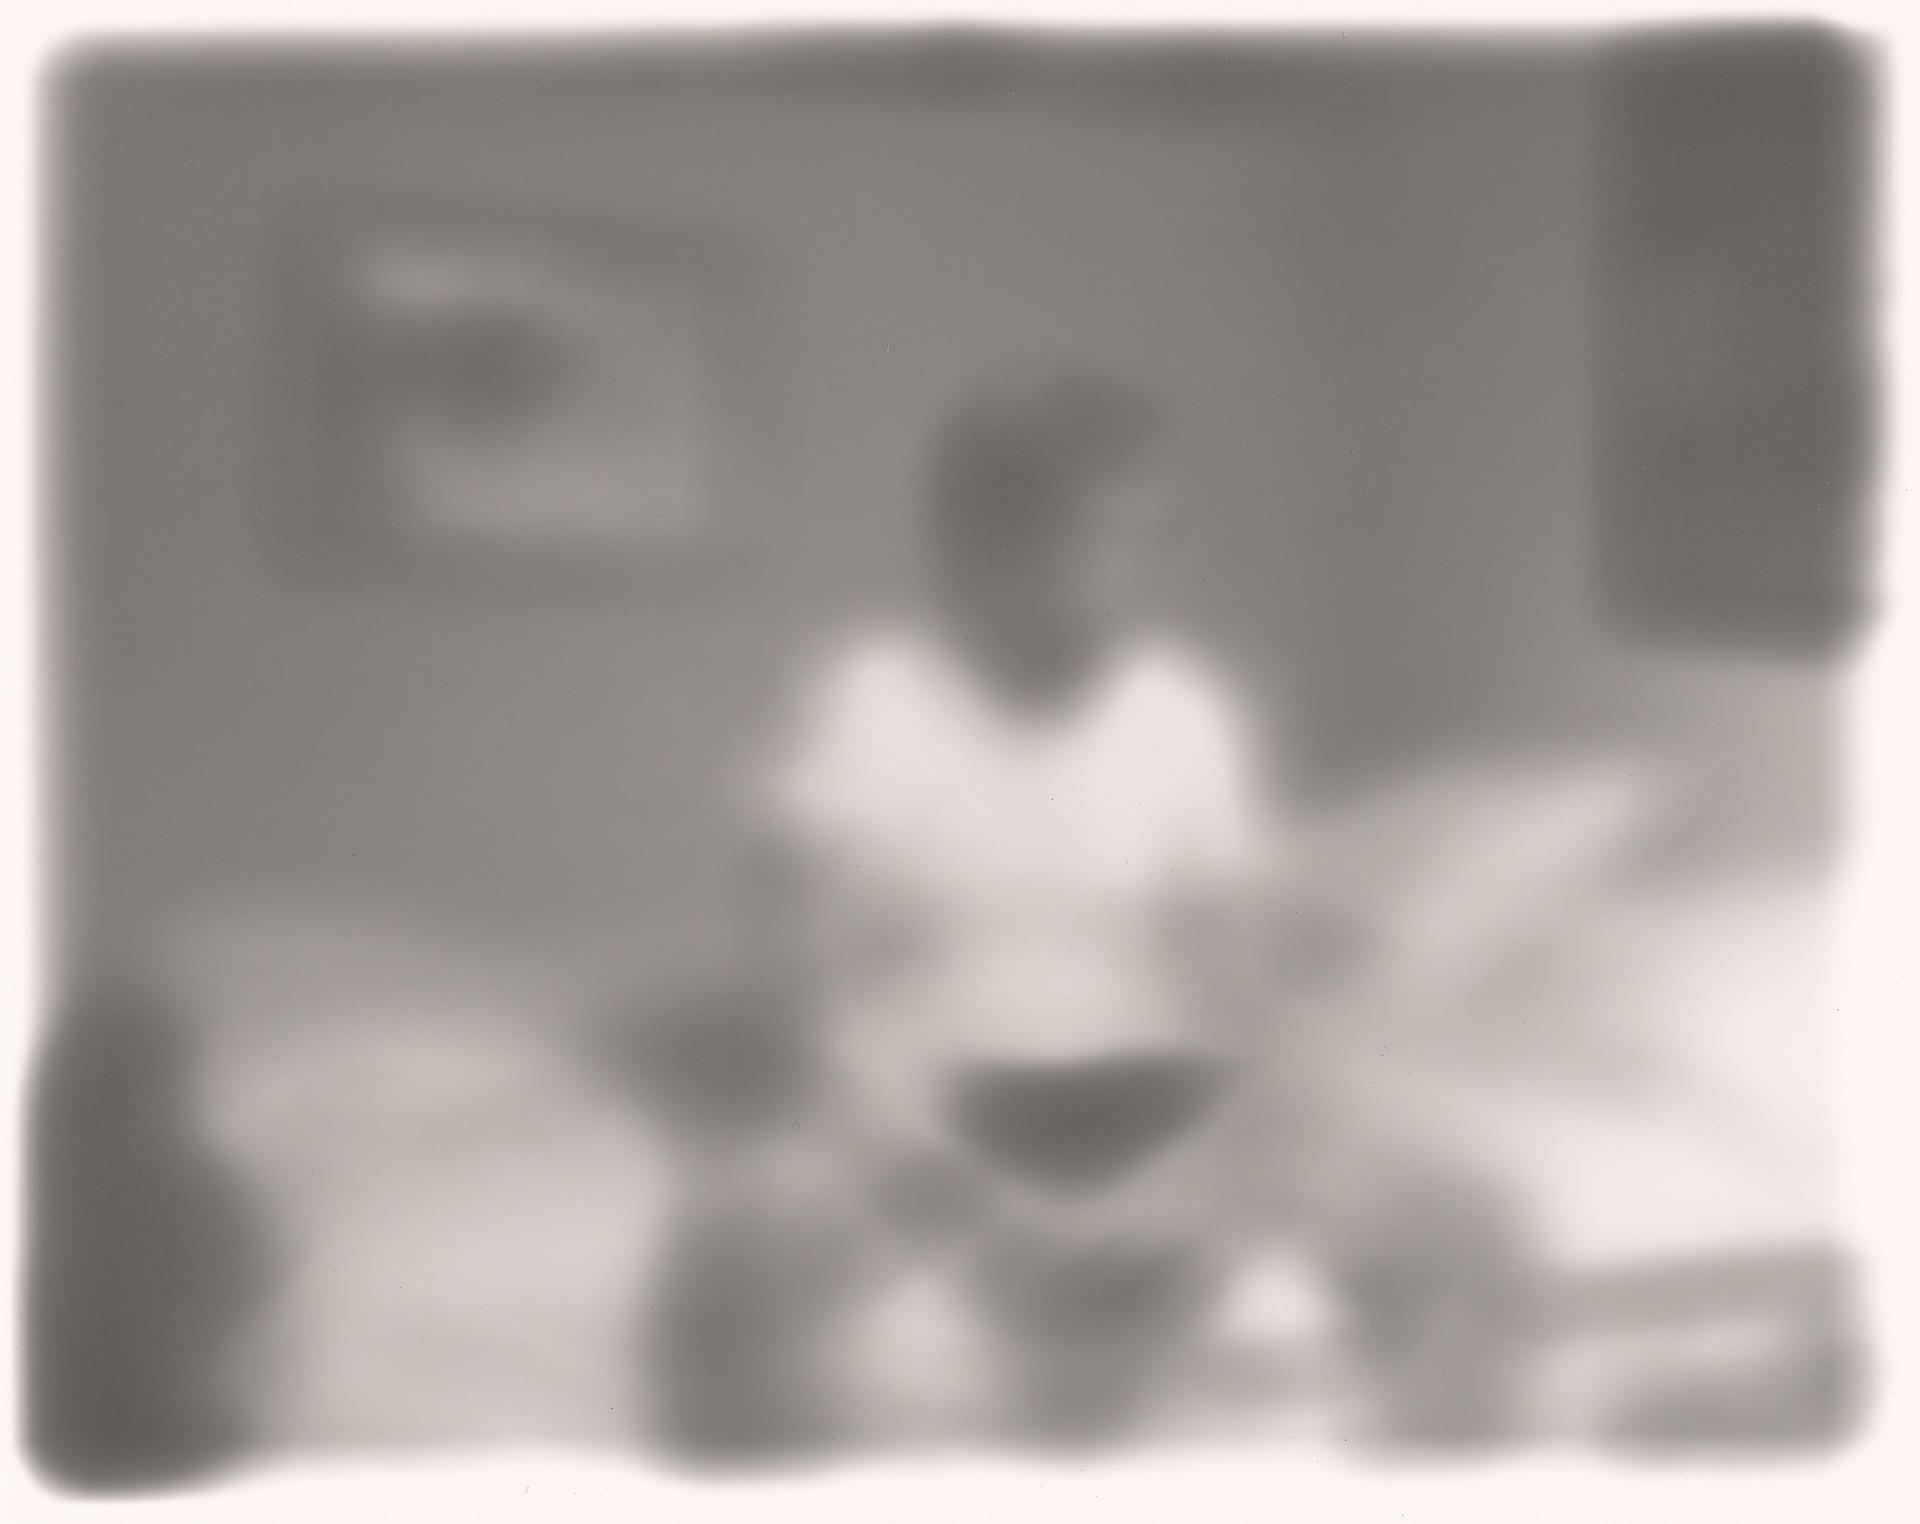 Dreamy, out-of-focus black-and-white image of a figure sitting on a bed, hands clasped between their knees.